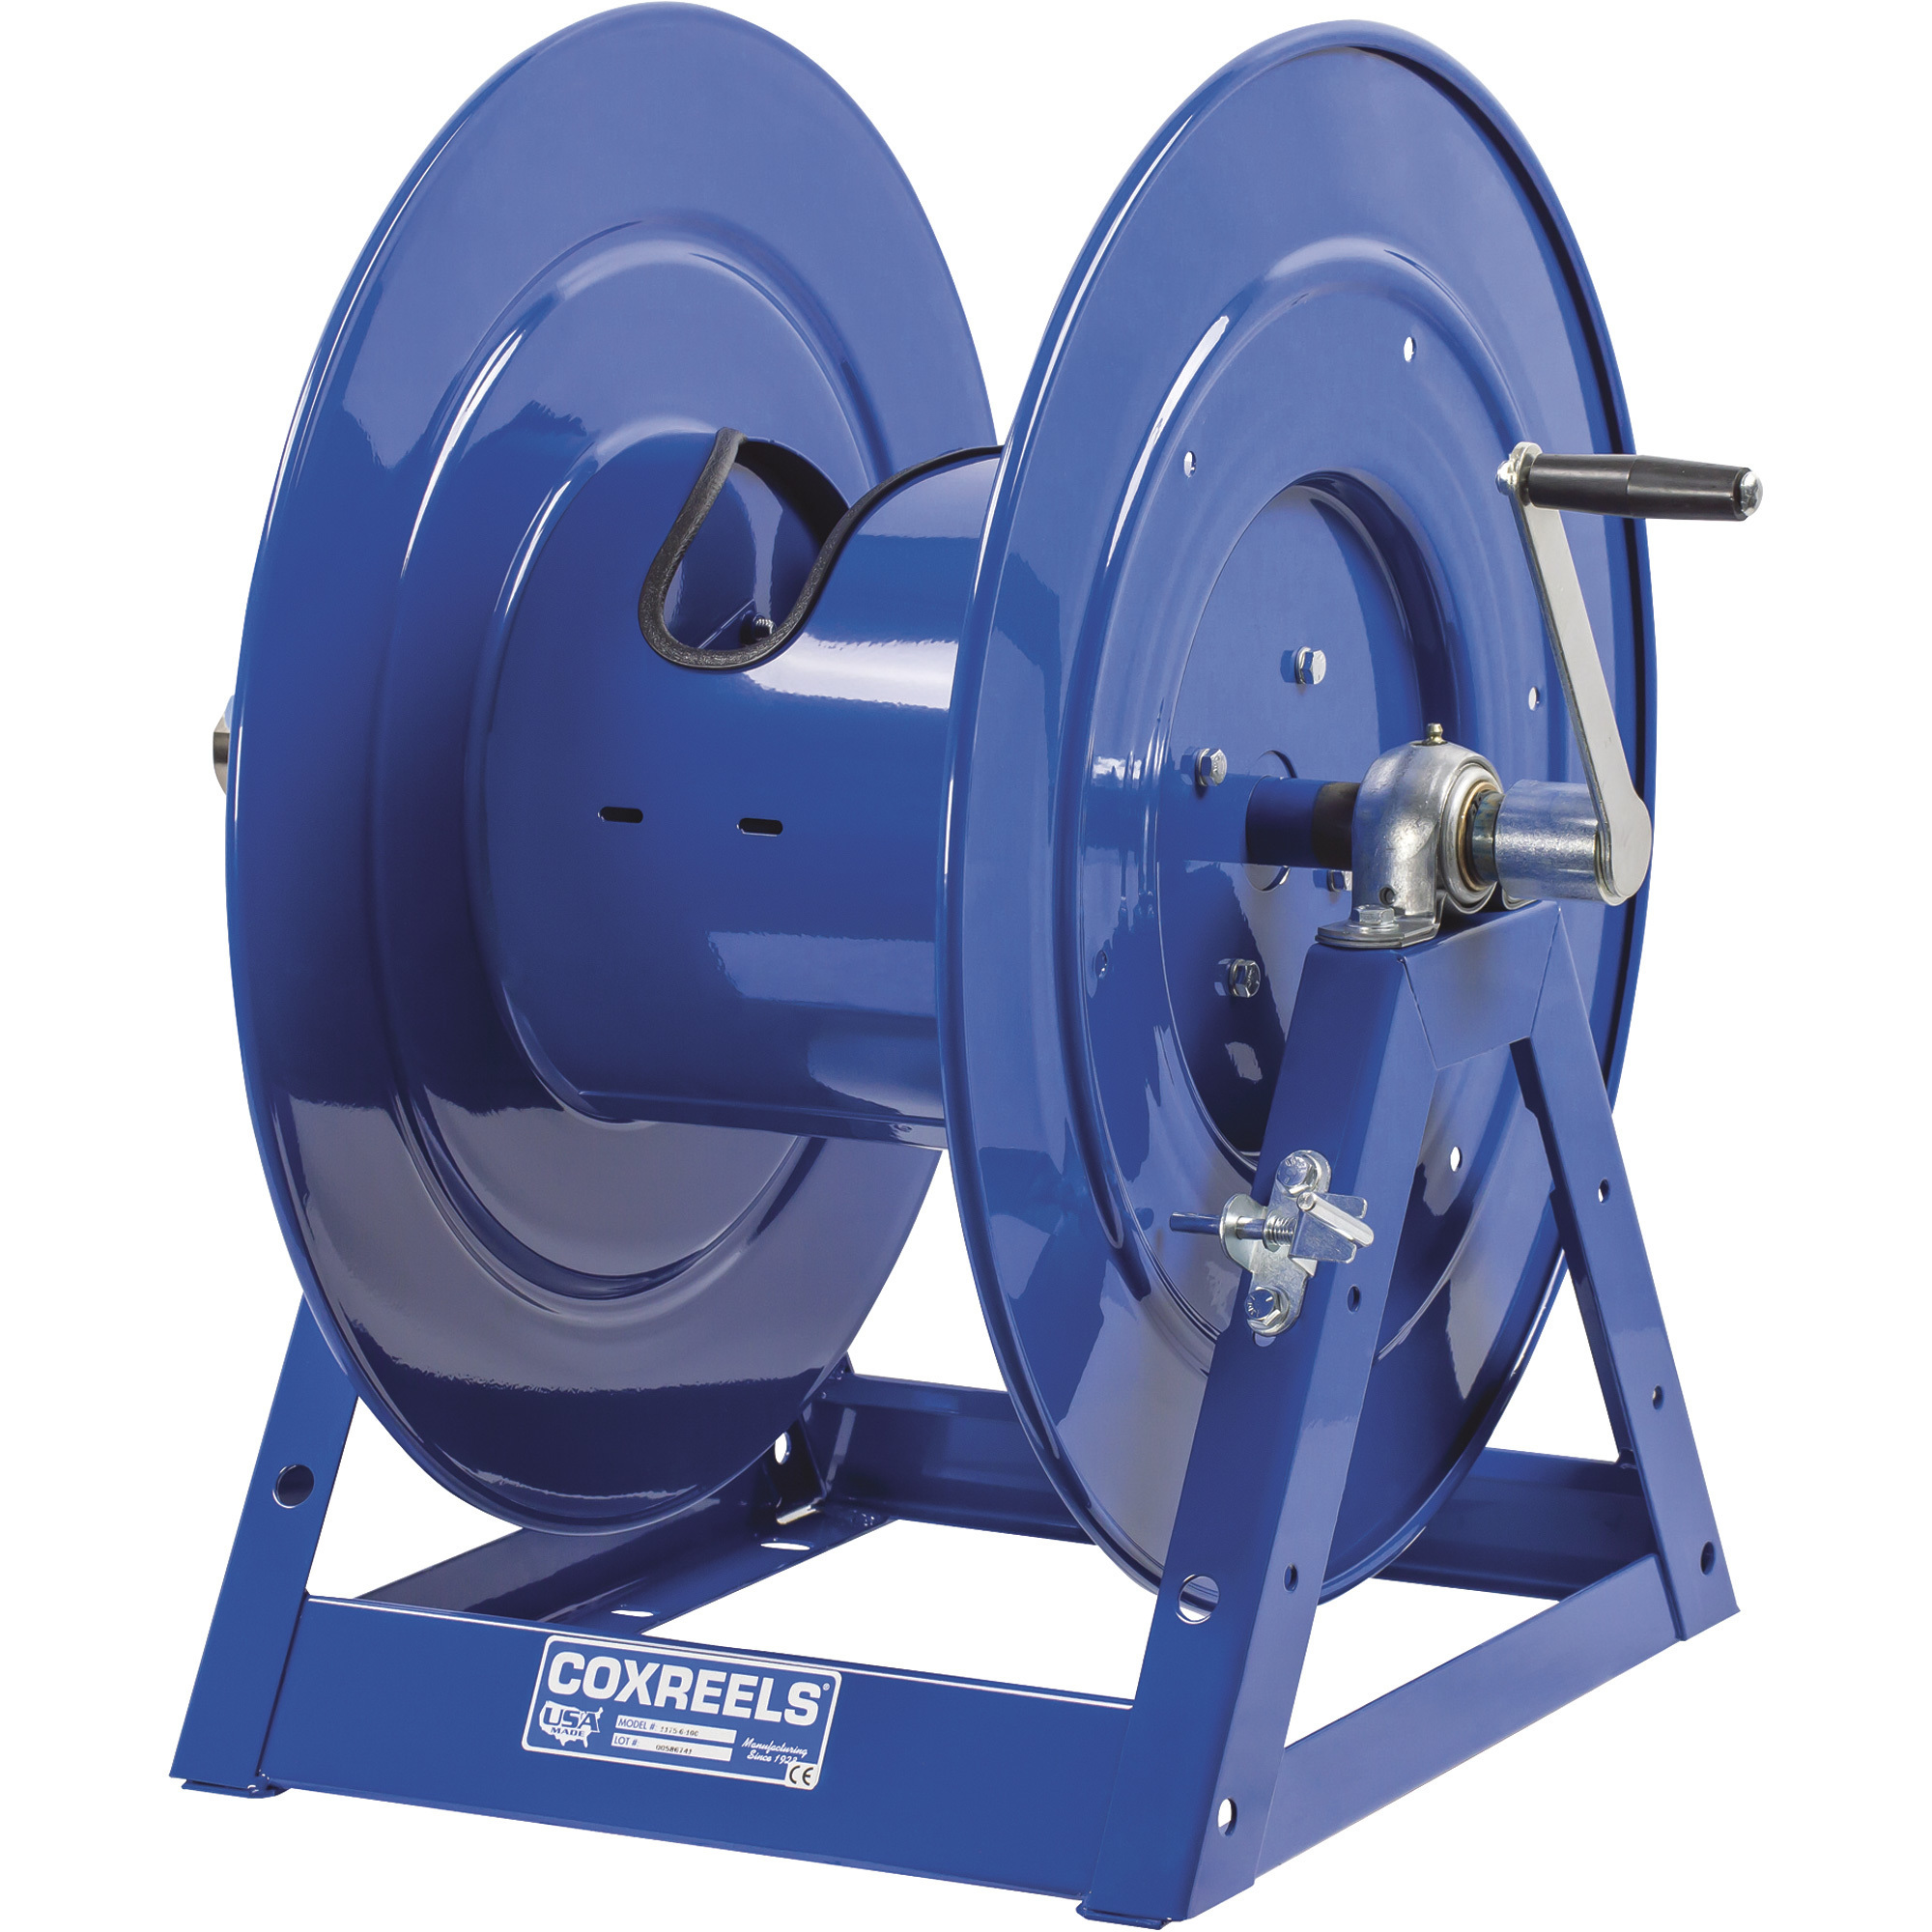 Coxreels 1175 Series Hand-Crank Hose Reel, Holds 1Inch x 50ft. Hose, Max. 3000 PSI, Model 1175-6-50